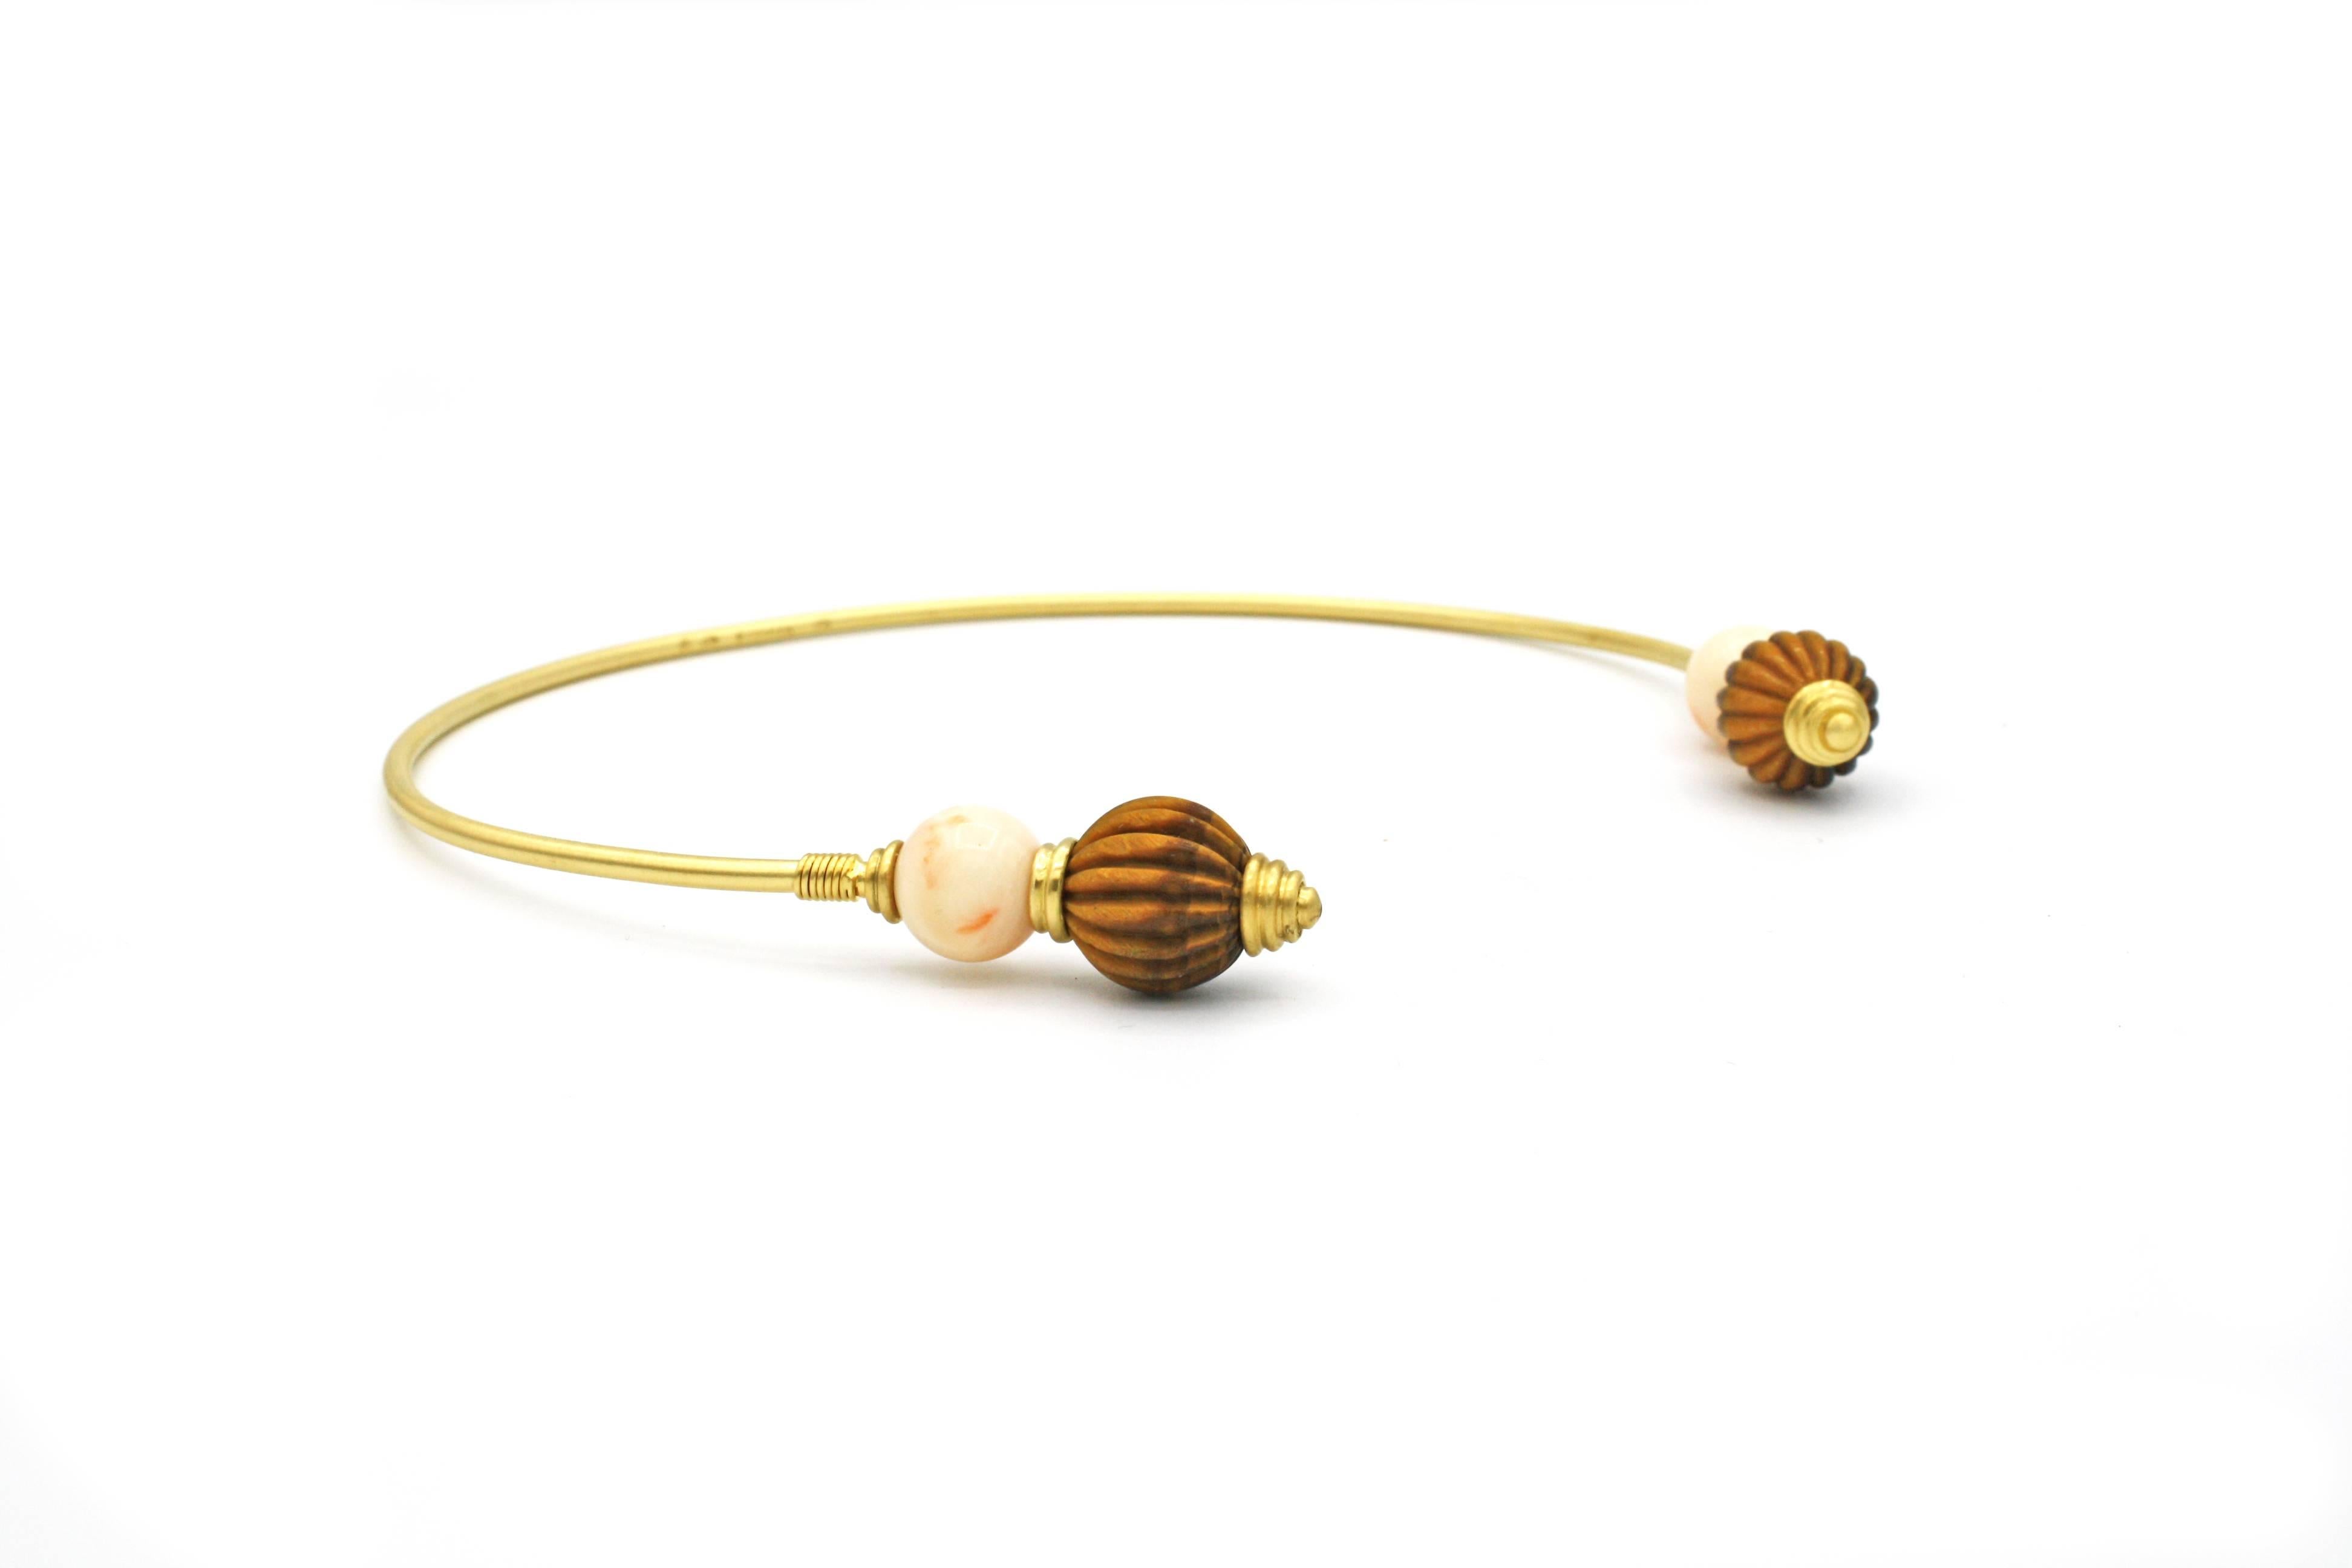 A chic and versatile 18k gold necklace with rare Angel Skin coral spheres and larger Tiger's Eye spheres, as well as Roman inspired details. Part of Renato Cipullo's Bocce Collection, inspired by the Ancient Roman game of Bocce Ball.